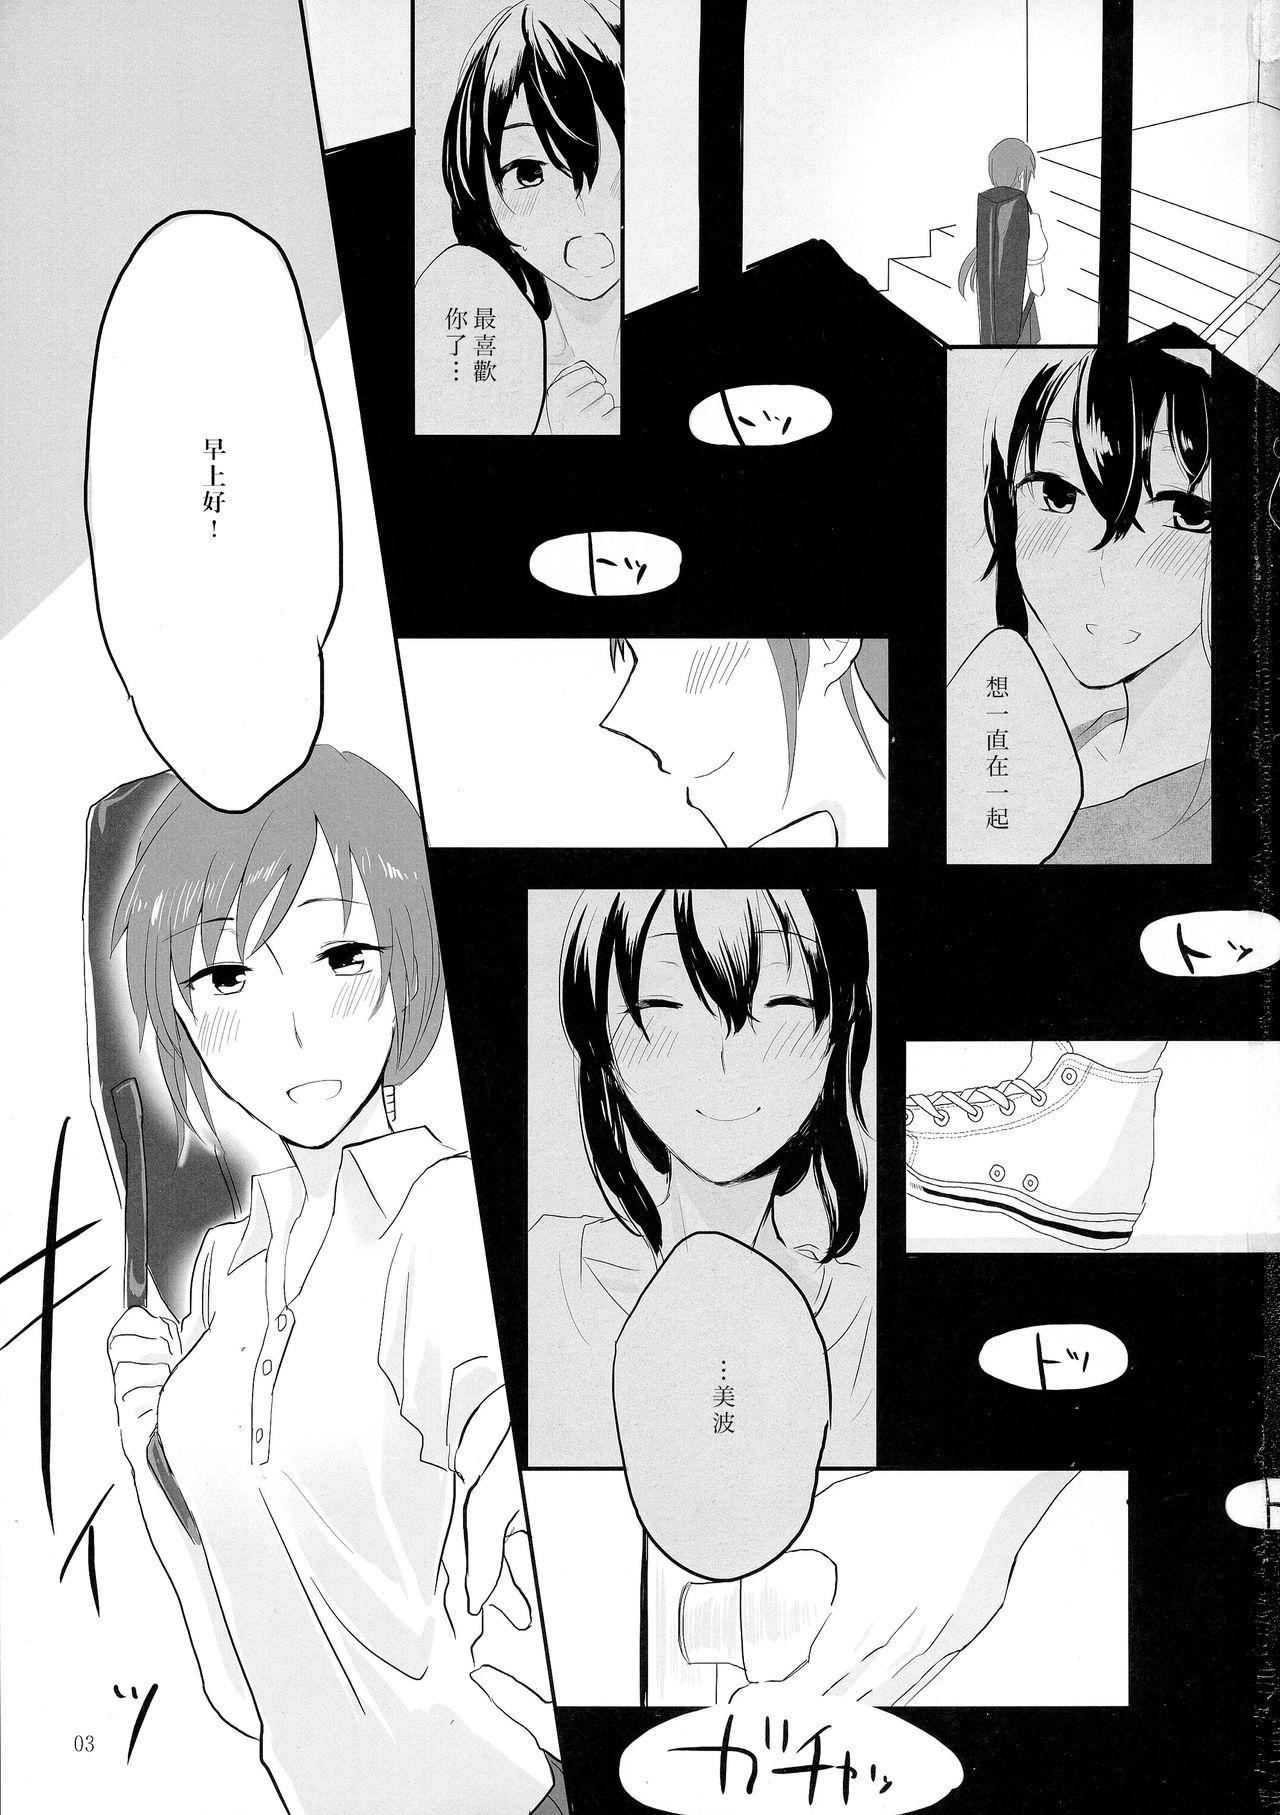 Clit obsessed - The idolmaster Foursome - Page 4